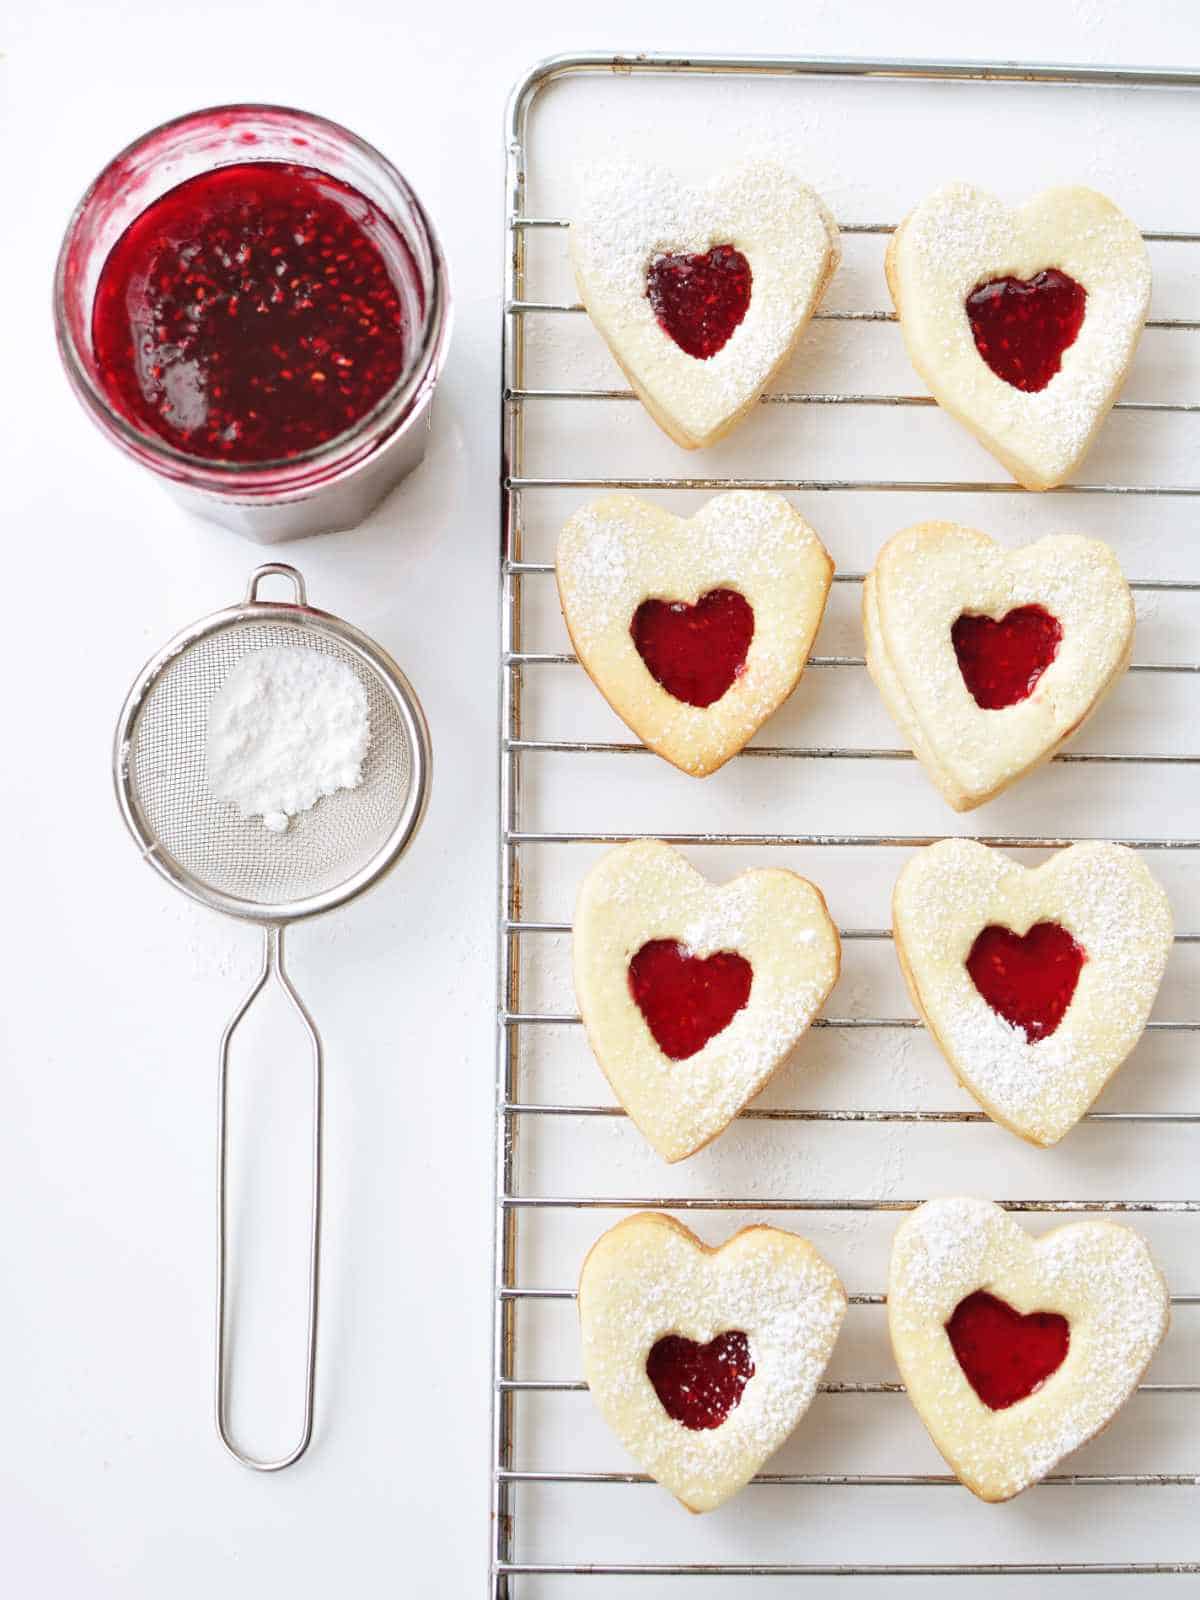 Heart shaped cookies put together as sandwich cookies. Sugar dusted top cutouts placed on hearts with raspberry jam on them.